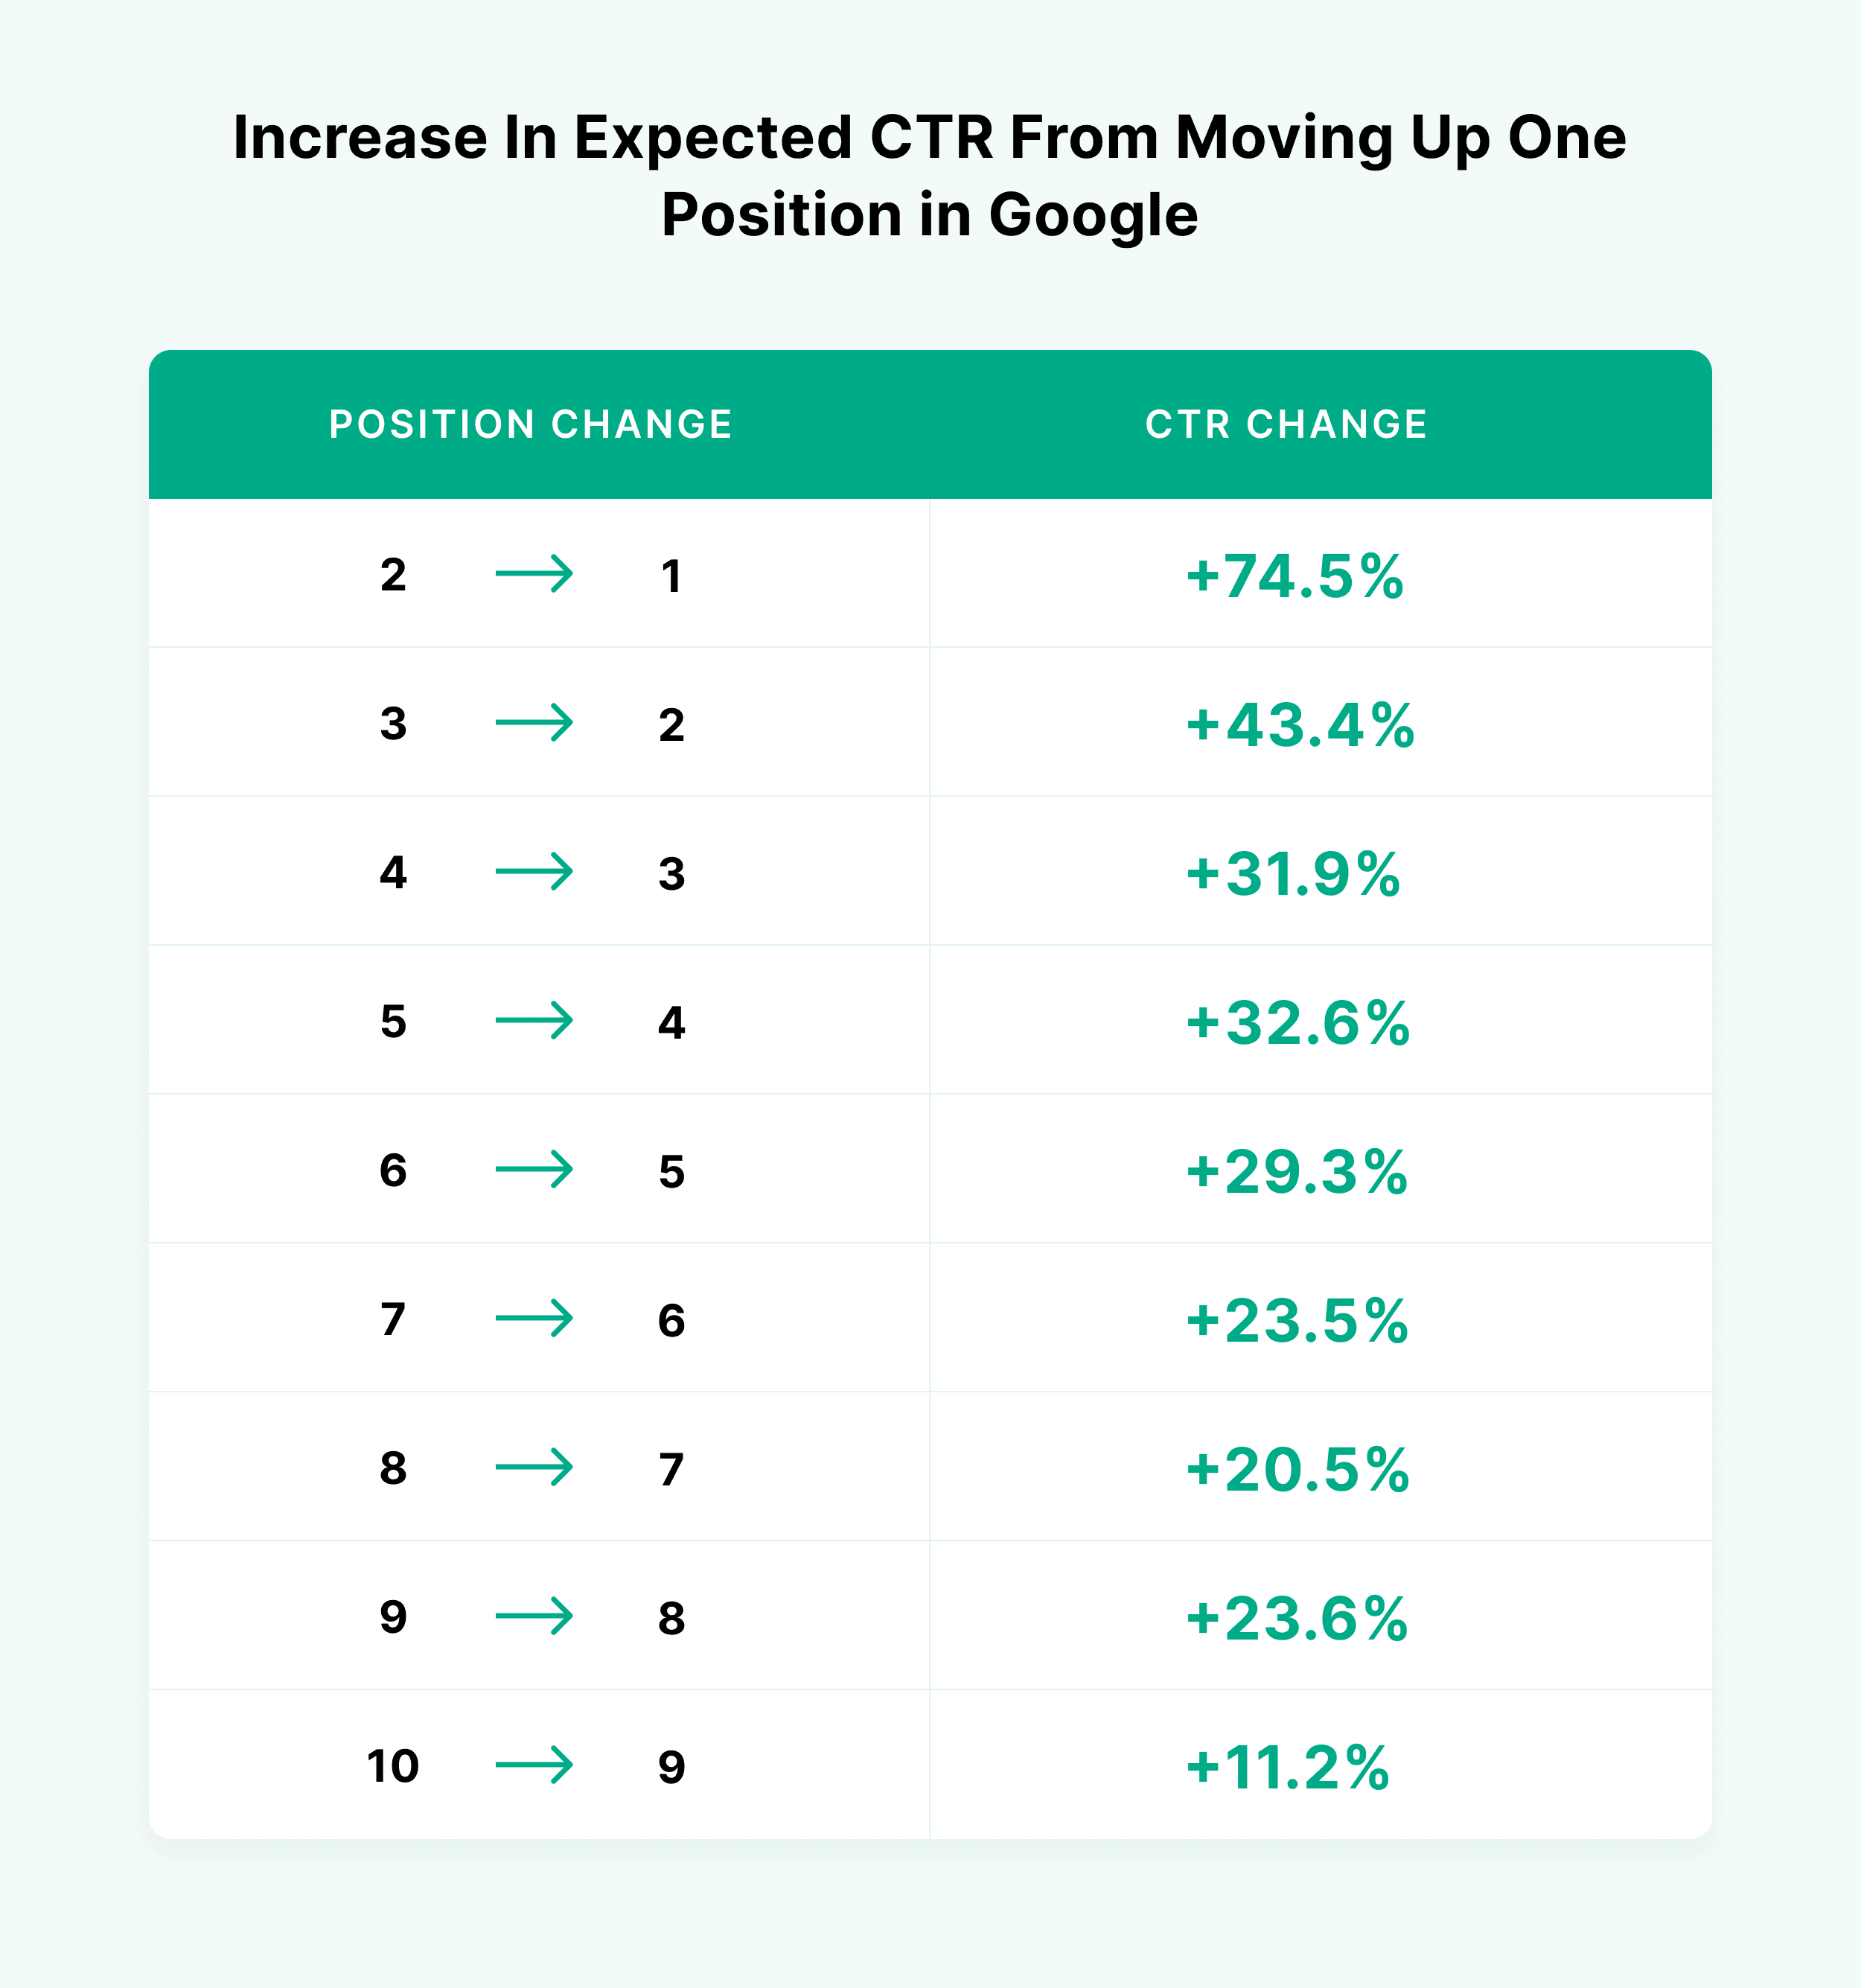 Increase in expected CTR from moving up one position in Google